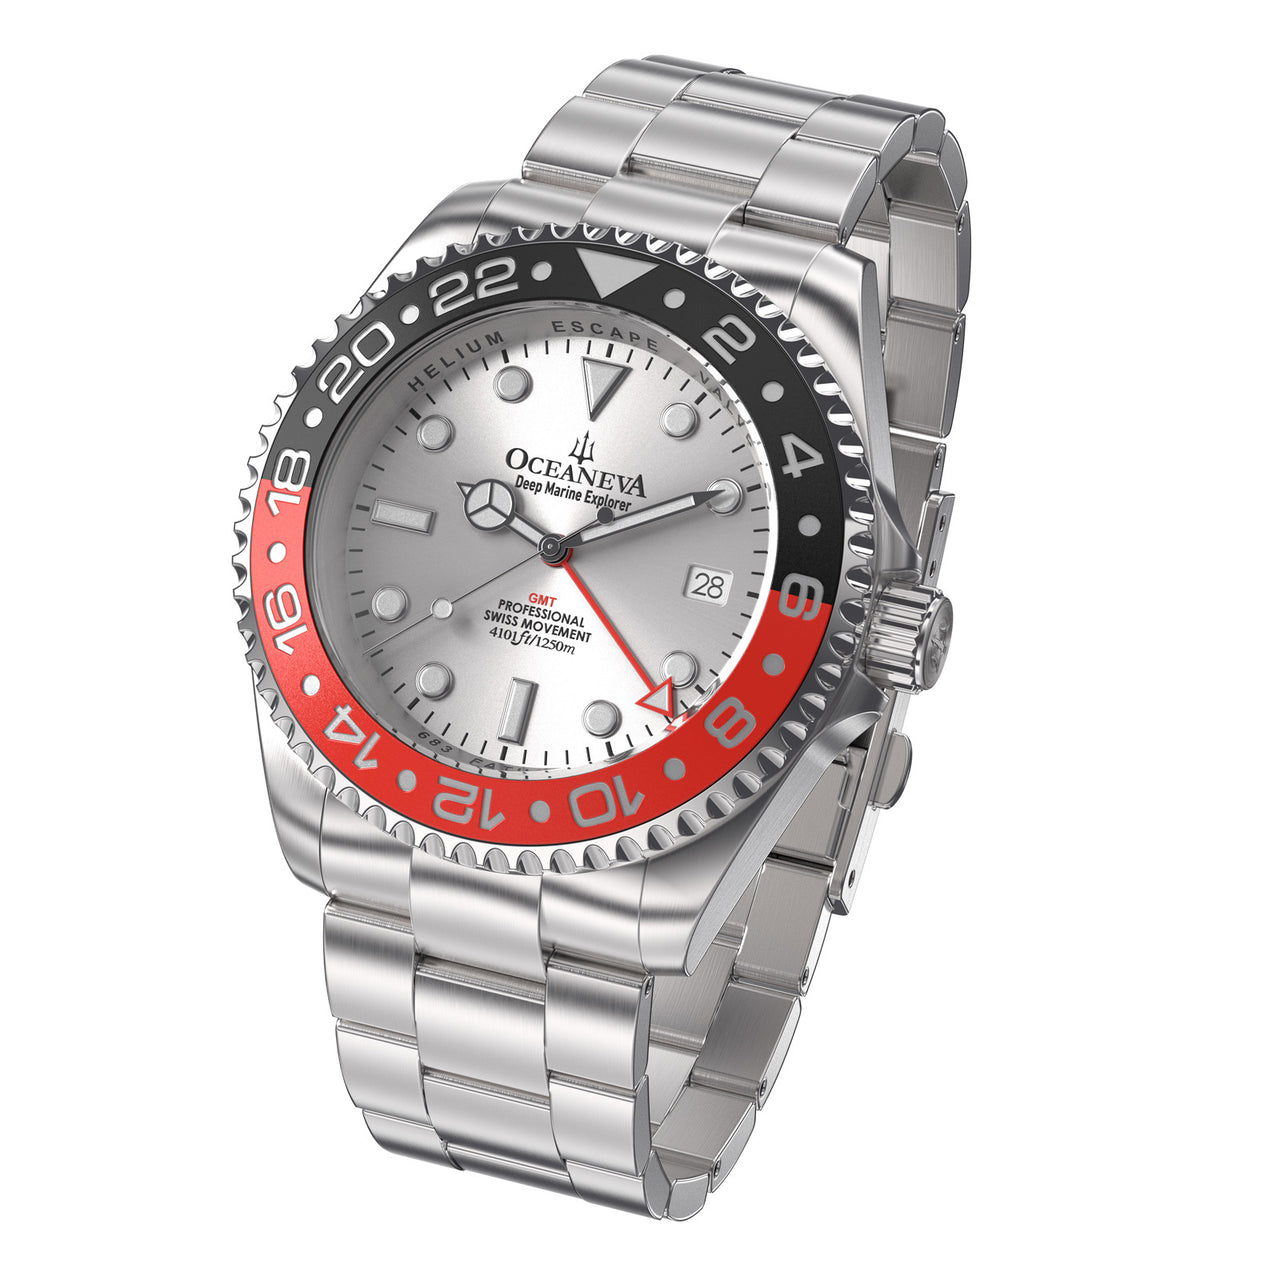 Oceaneva 1250M GMT Dive Watch Silver Red And Black Front Picture Slight Left Slant View